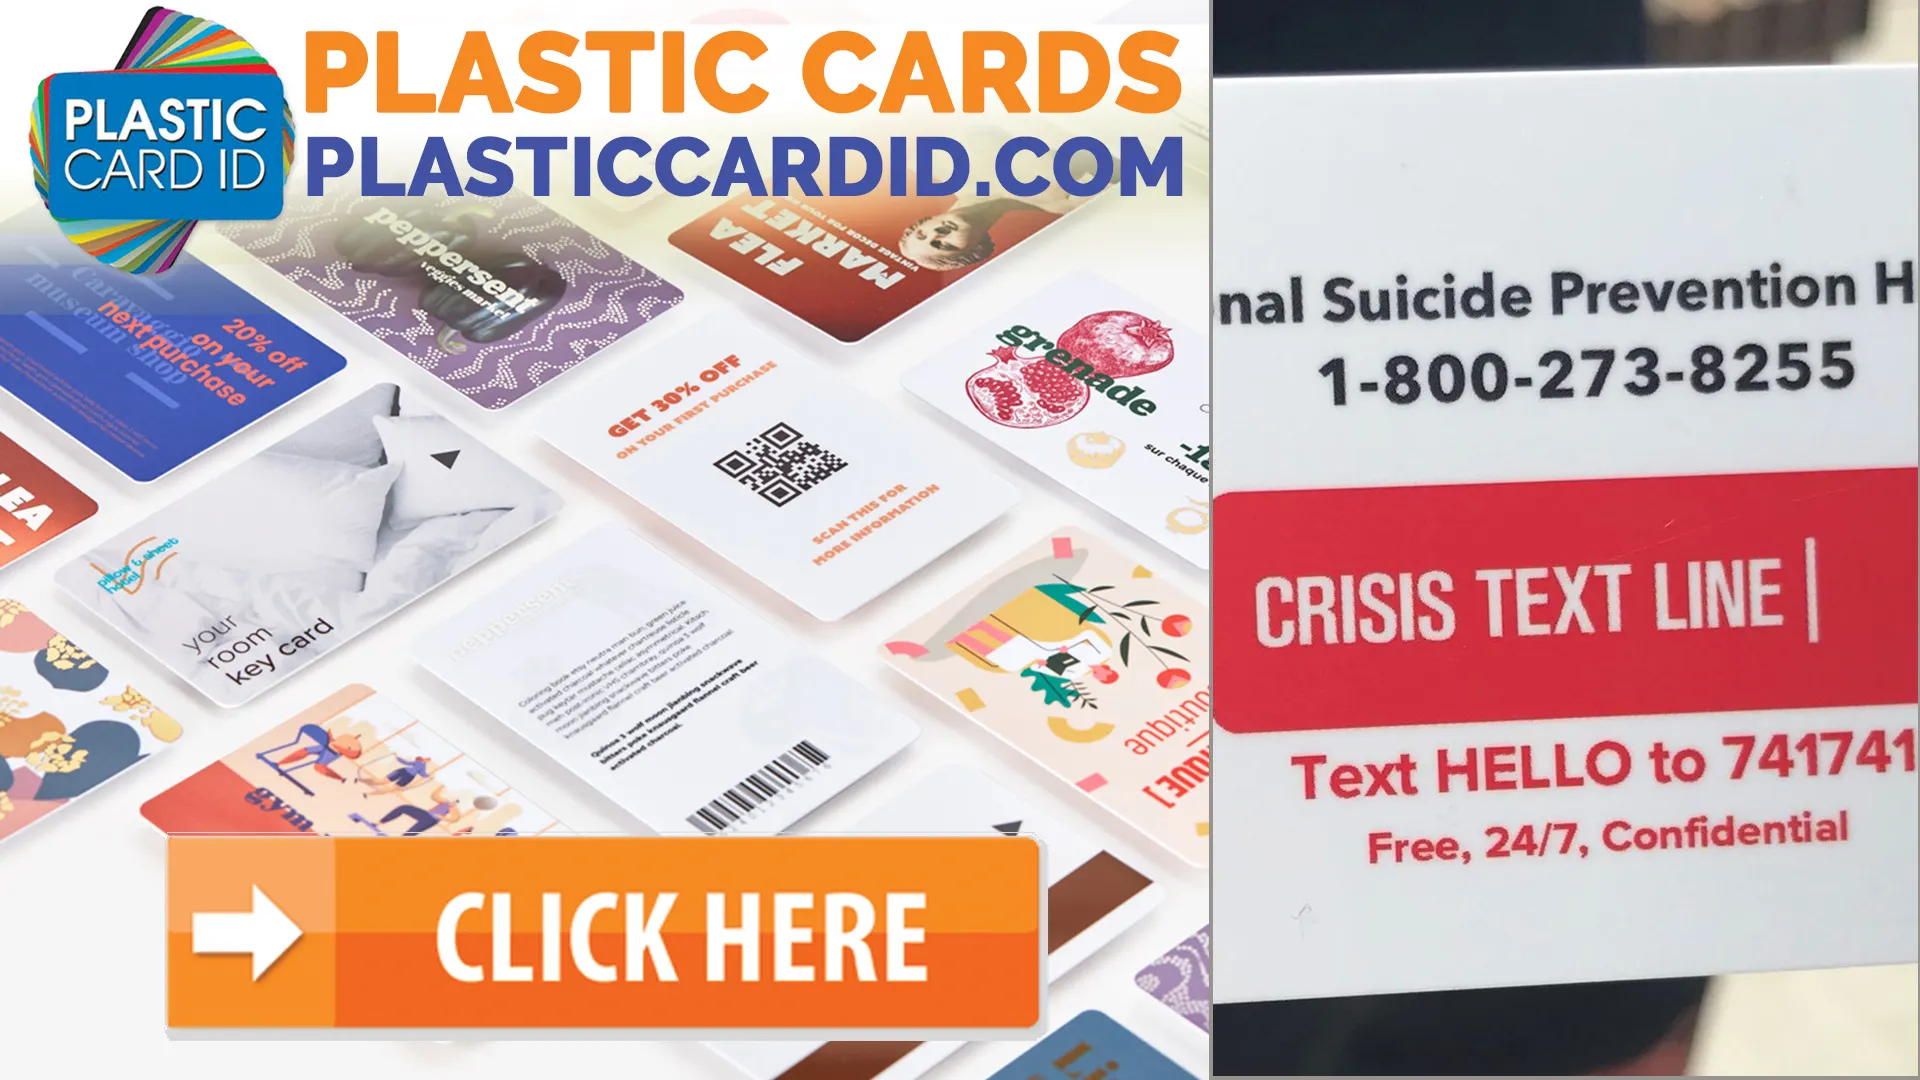 Welcome to Plastic Card ID




: Your Trusted Partner for Plastic Card Solutions